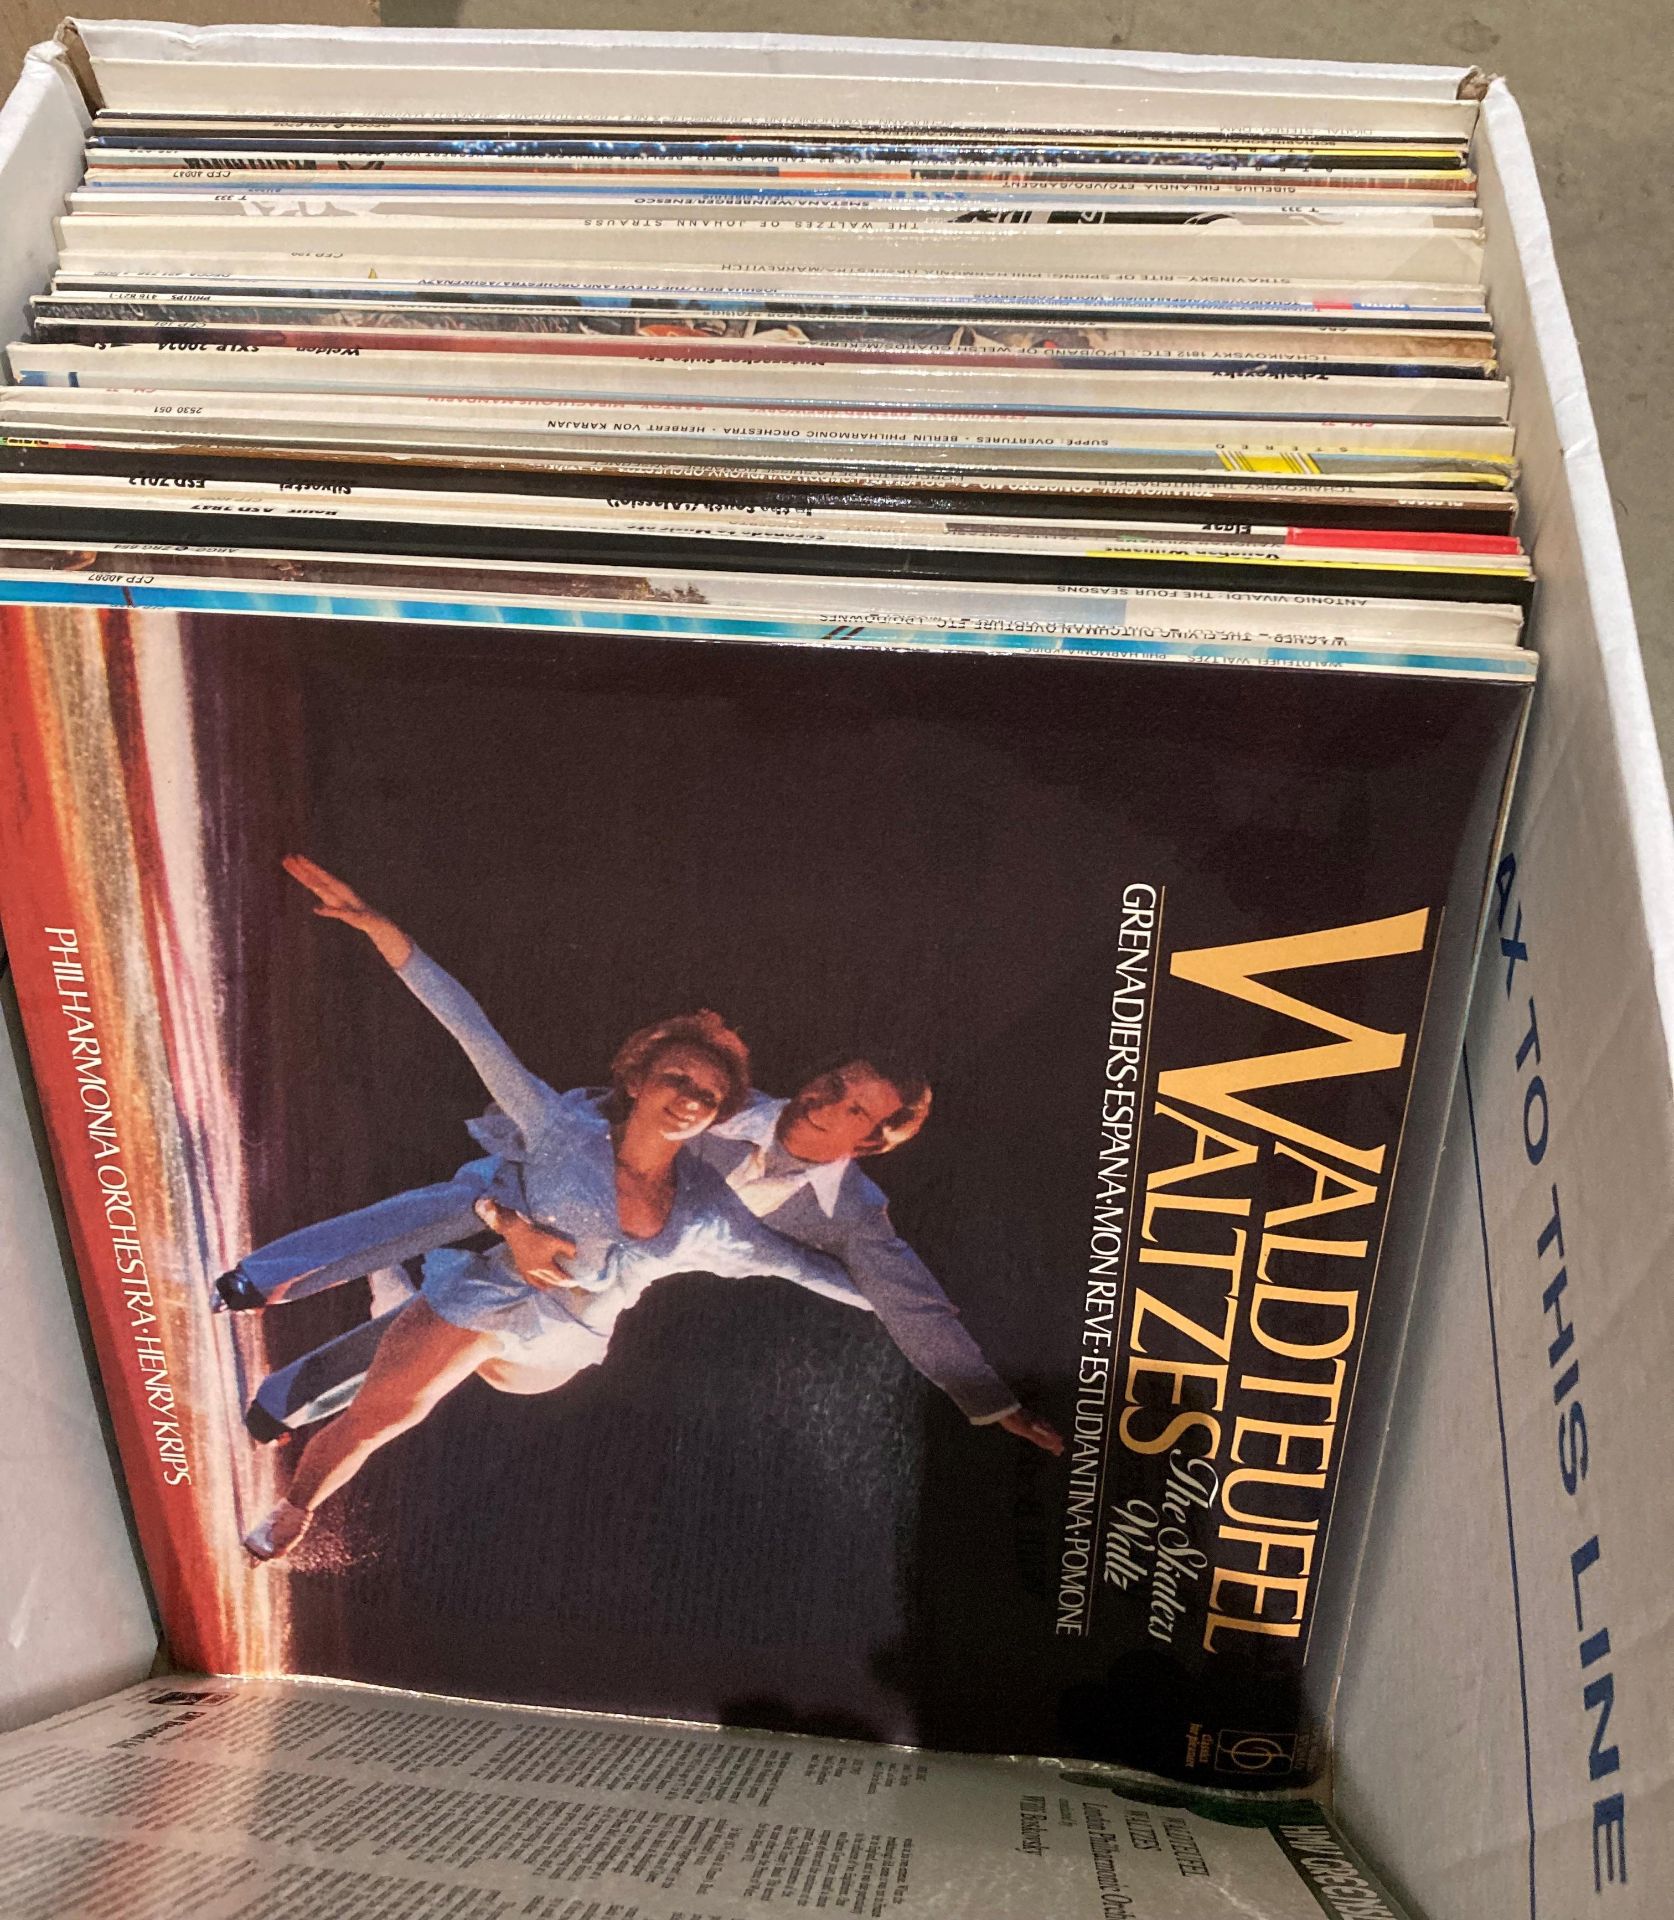 Contents to two boxes - approximately 110 classical LPs etc. - Image 3 of 6